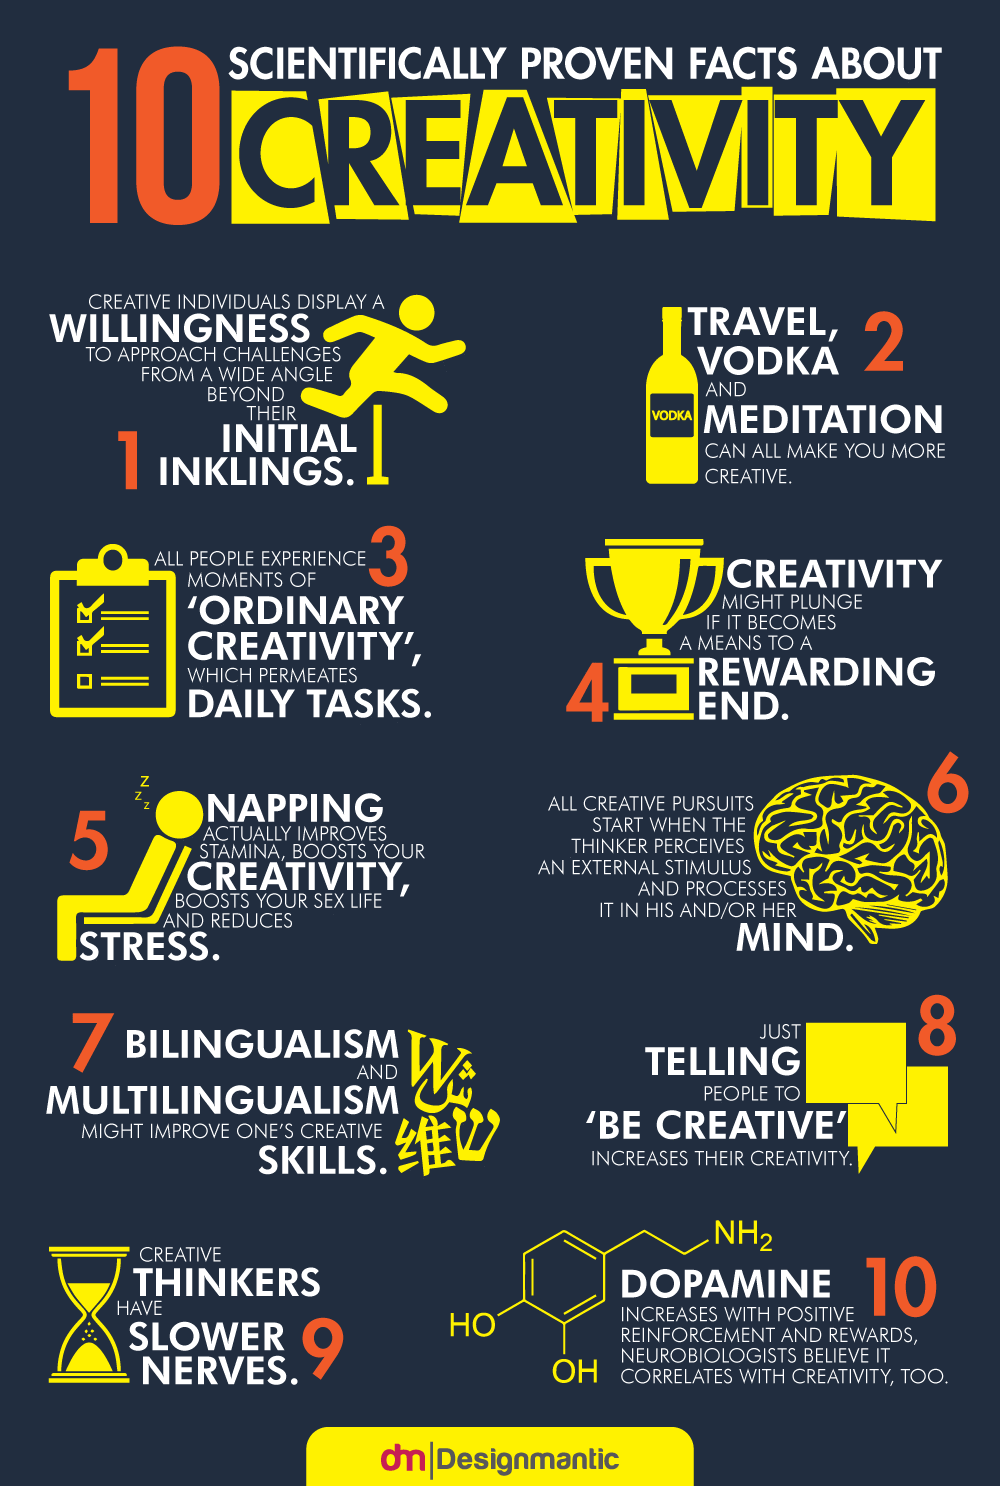 Infographic about 10 scientifically proven facts about creative thinking